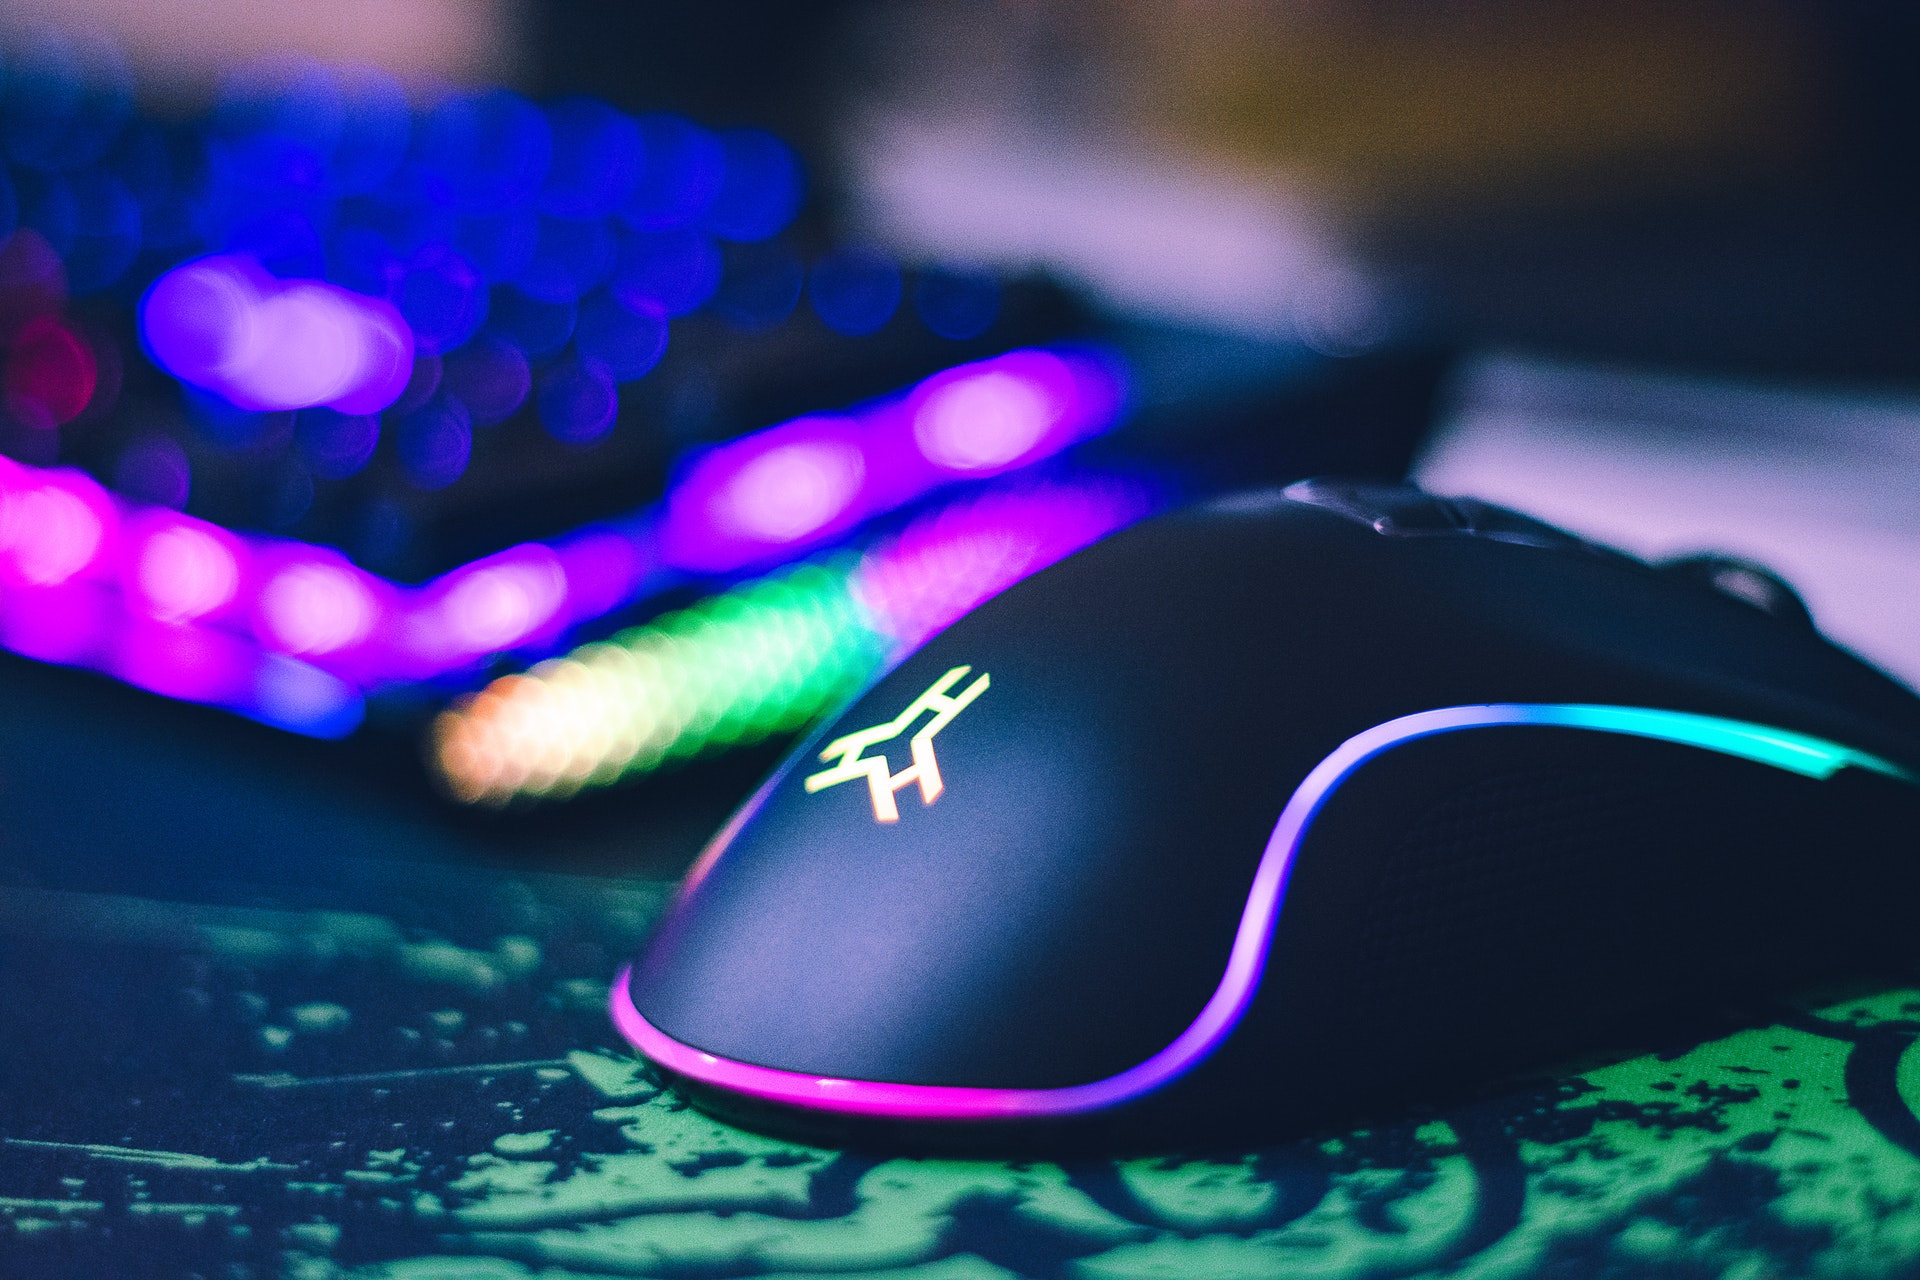 Gamer Blurred Mouse Pad Keyboards Photography Digital 1920x1280